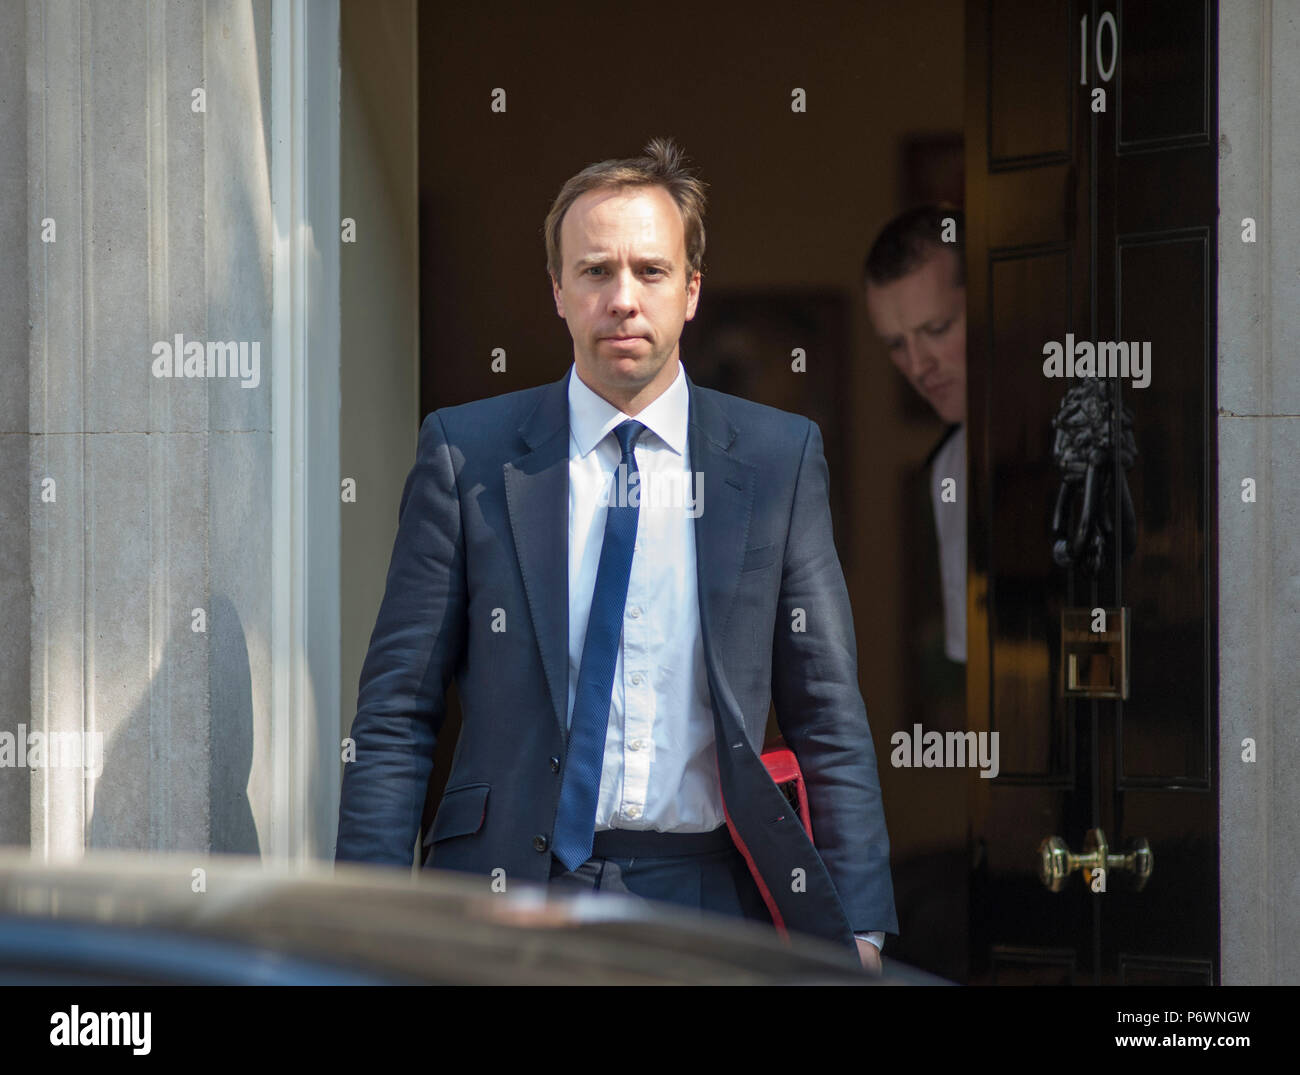 Downing Street, London, UK. 3 July 2018. Matt Hancock, Secretary of State for Culture Media and Sport leaves Downing Street after weekly cabinet meeting. Credit: Malcolm Park/Alamy Live News. Stock Photo